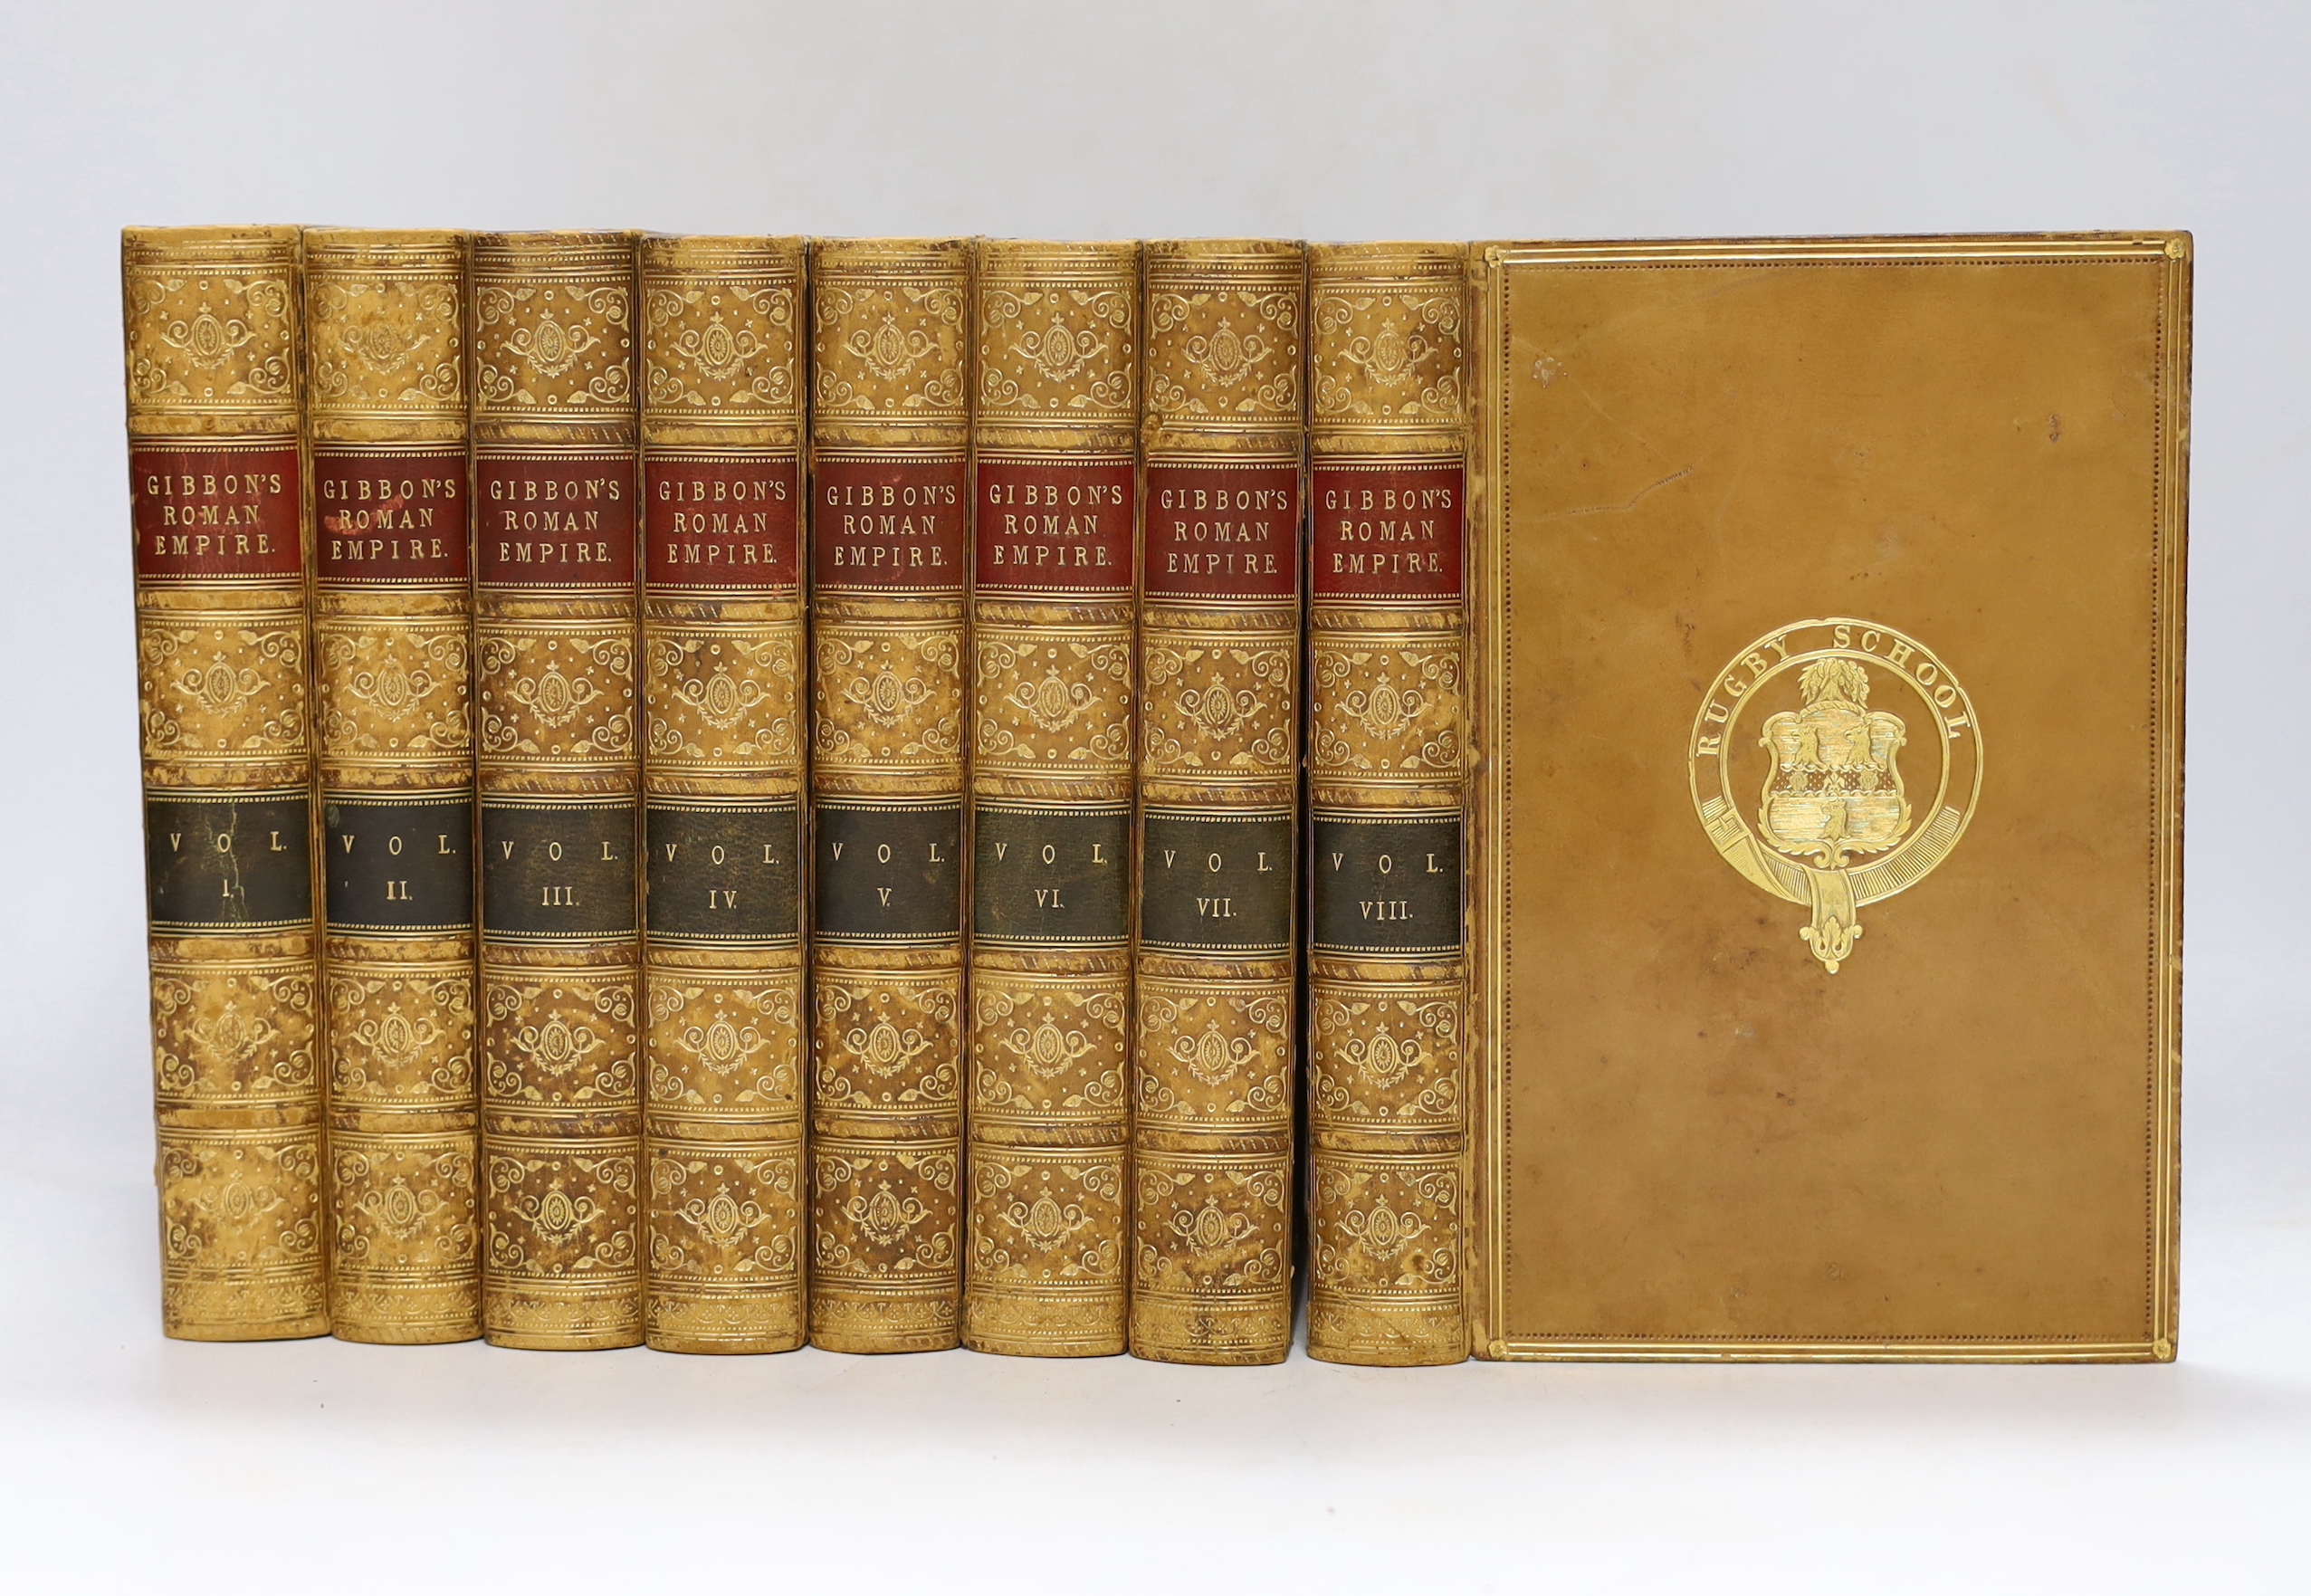 Gibbon, Edward - The History of the Decline and Fall of the Roman Empire ... (new edition) 8vols., edited, with additional notes, by William Smith. portrait frontis and 14 maps (mostly folded